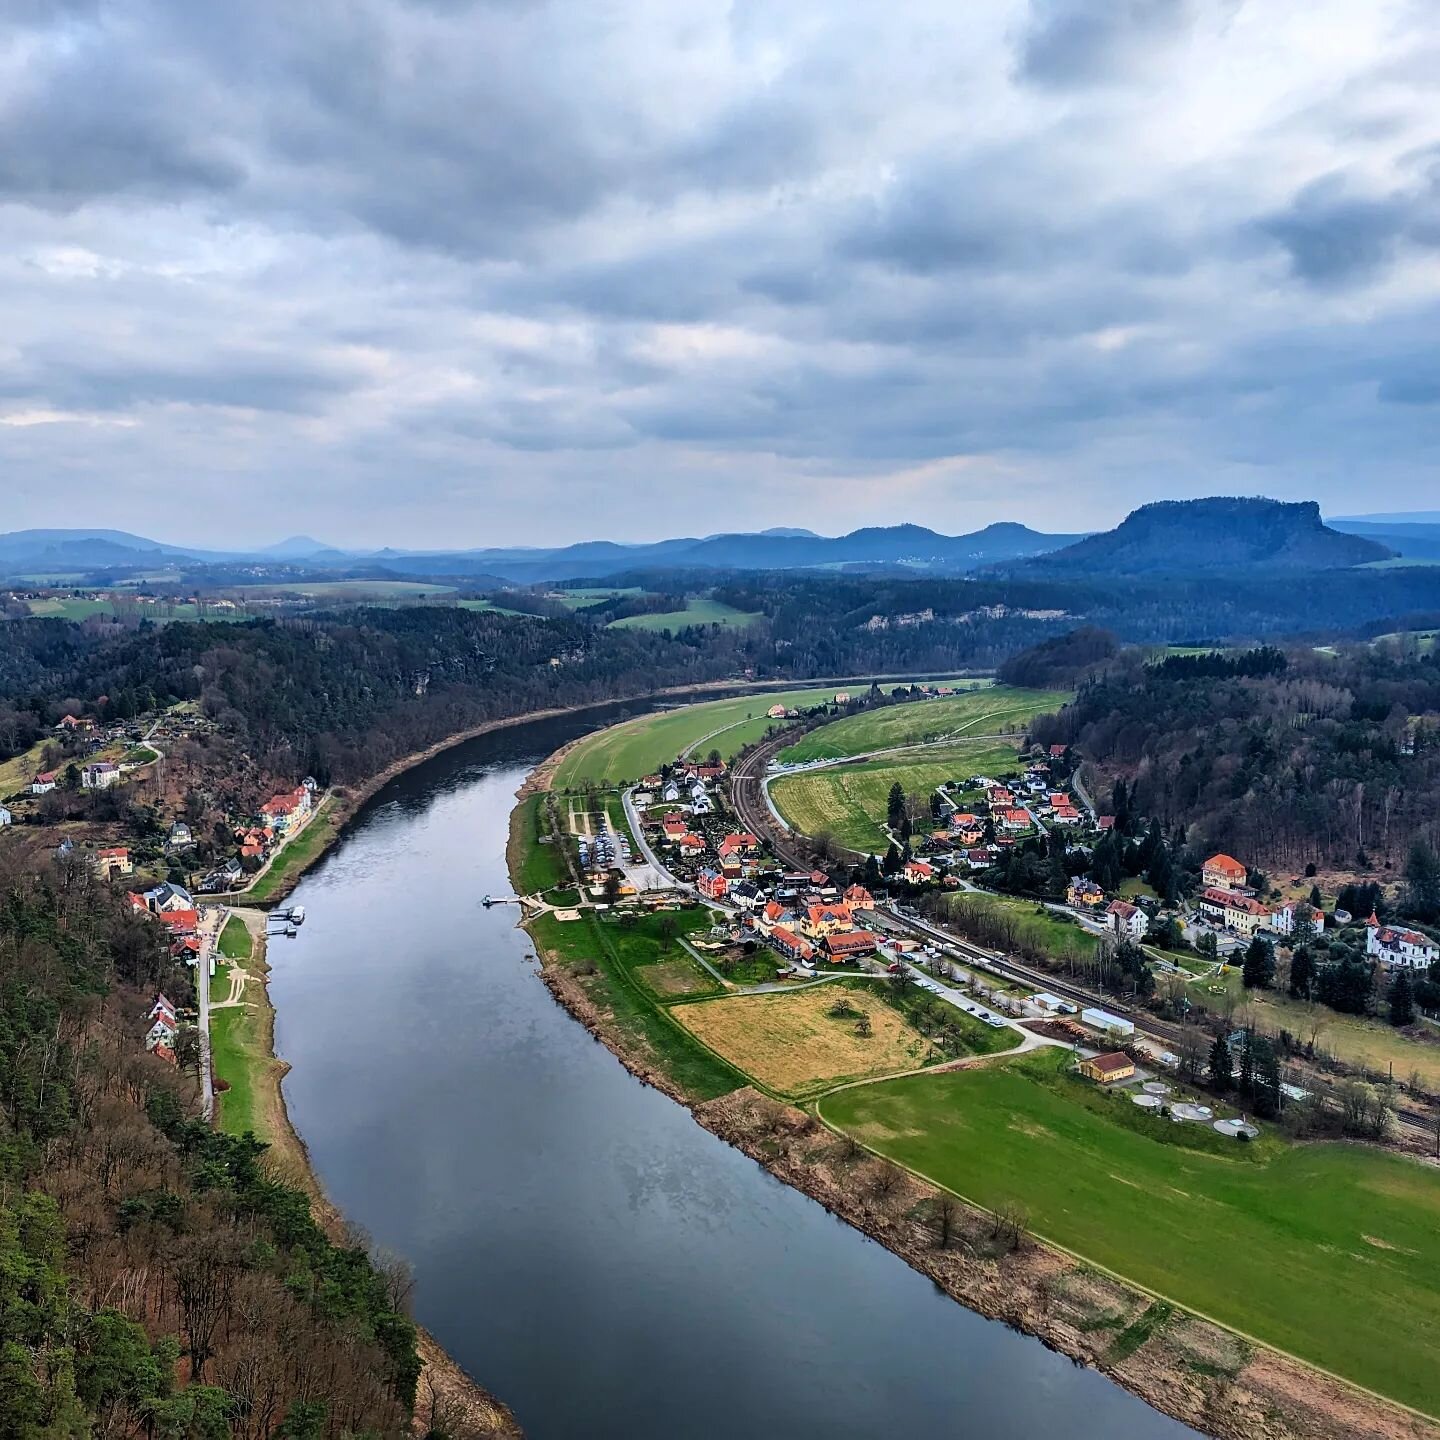 Elbe - take a ride on this and it'll take you all the way to the North Sea. #saxony #saxonswitzerland #travelphotography #travelgram #river #elbe #mountains #landscape #landscapephotography #EastGermany #ostdeutschland #east